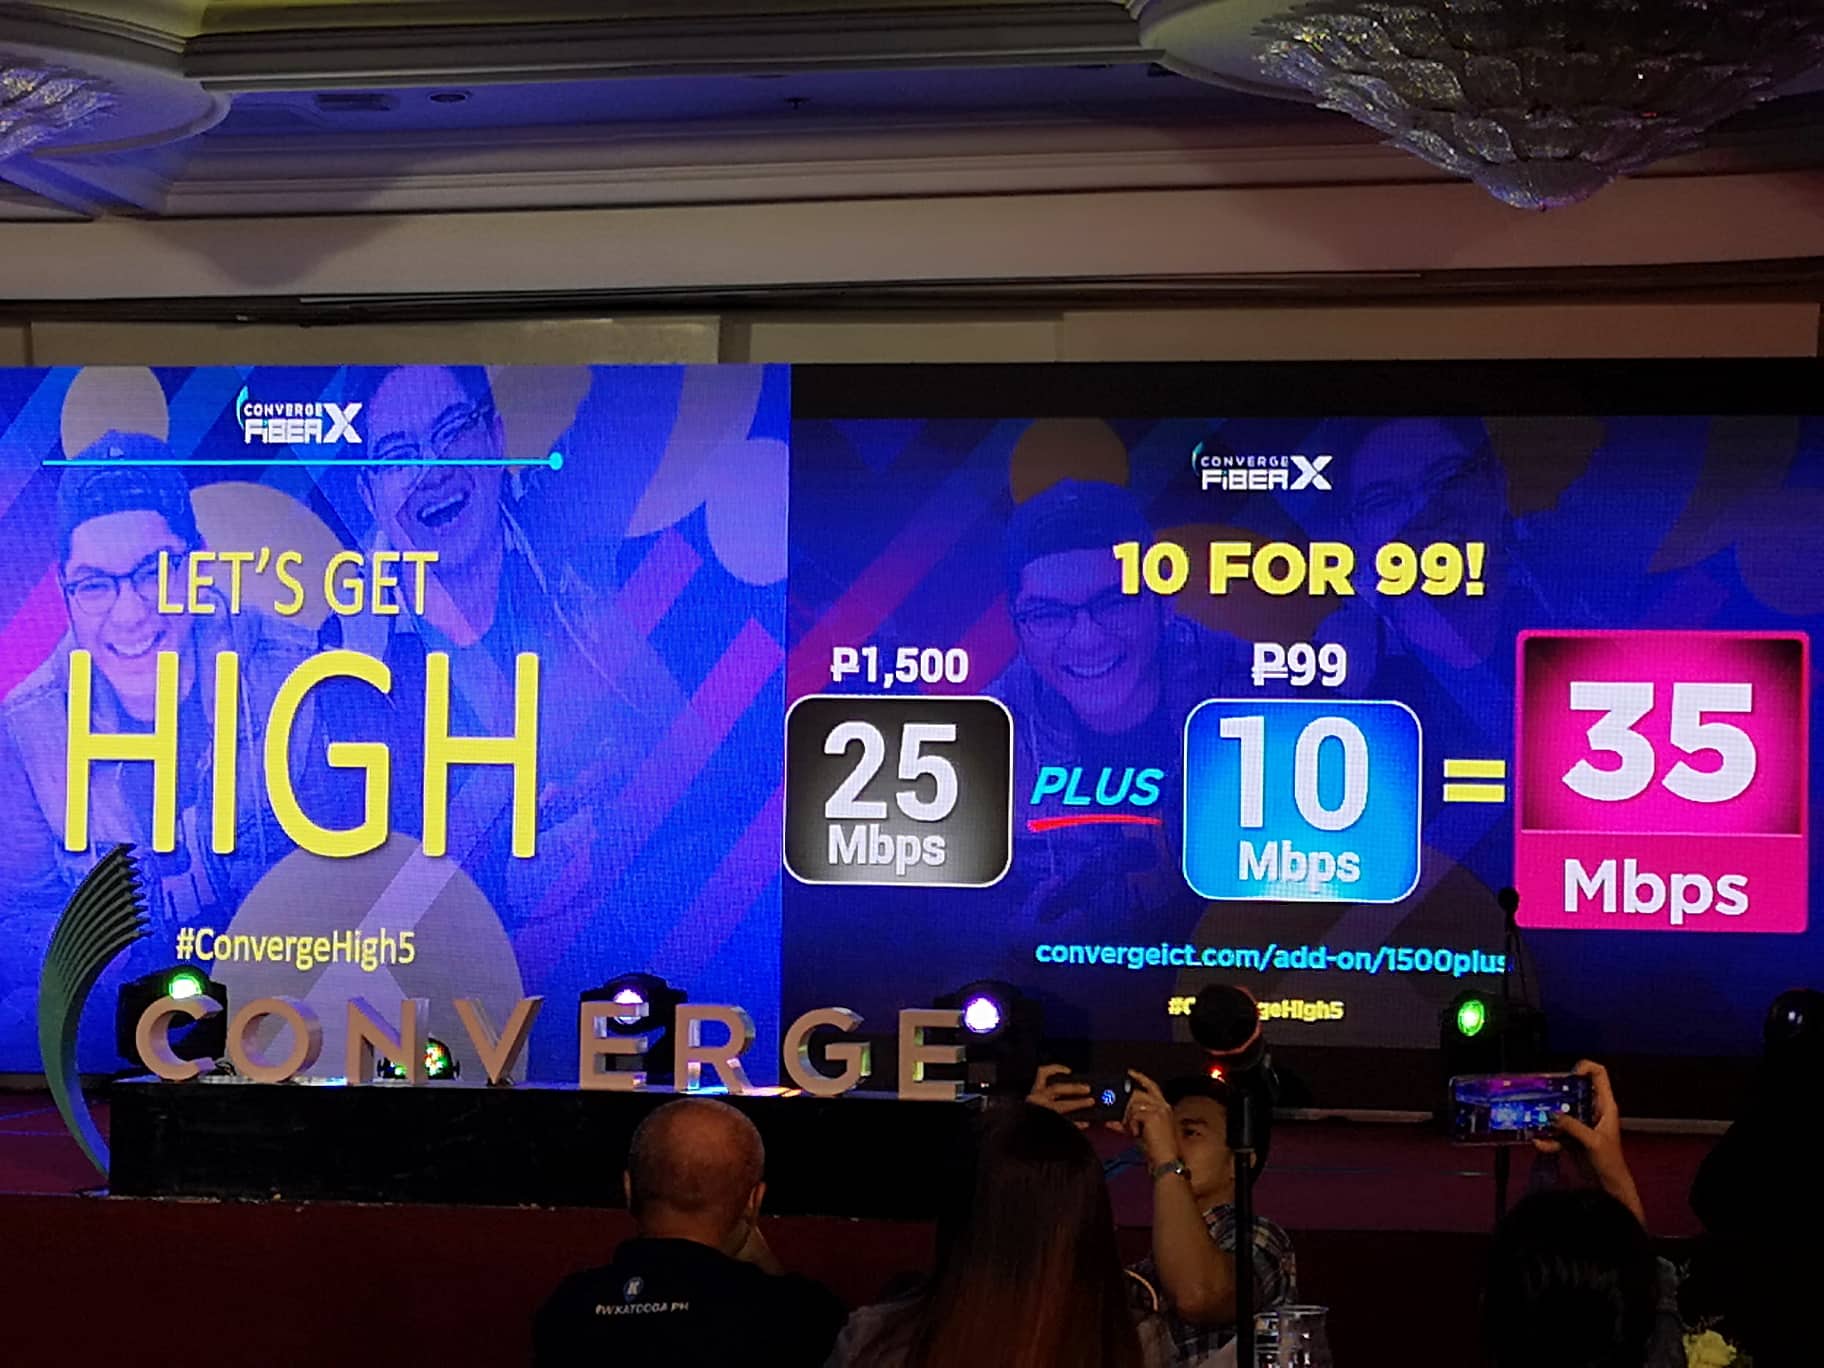 Converge ICT Gives The Best Treat to Filipinos by Upgrading Plan Speeds For Free